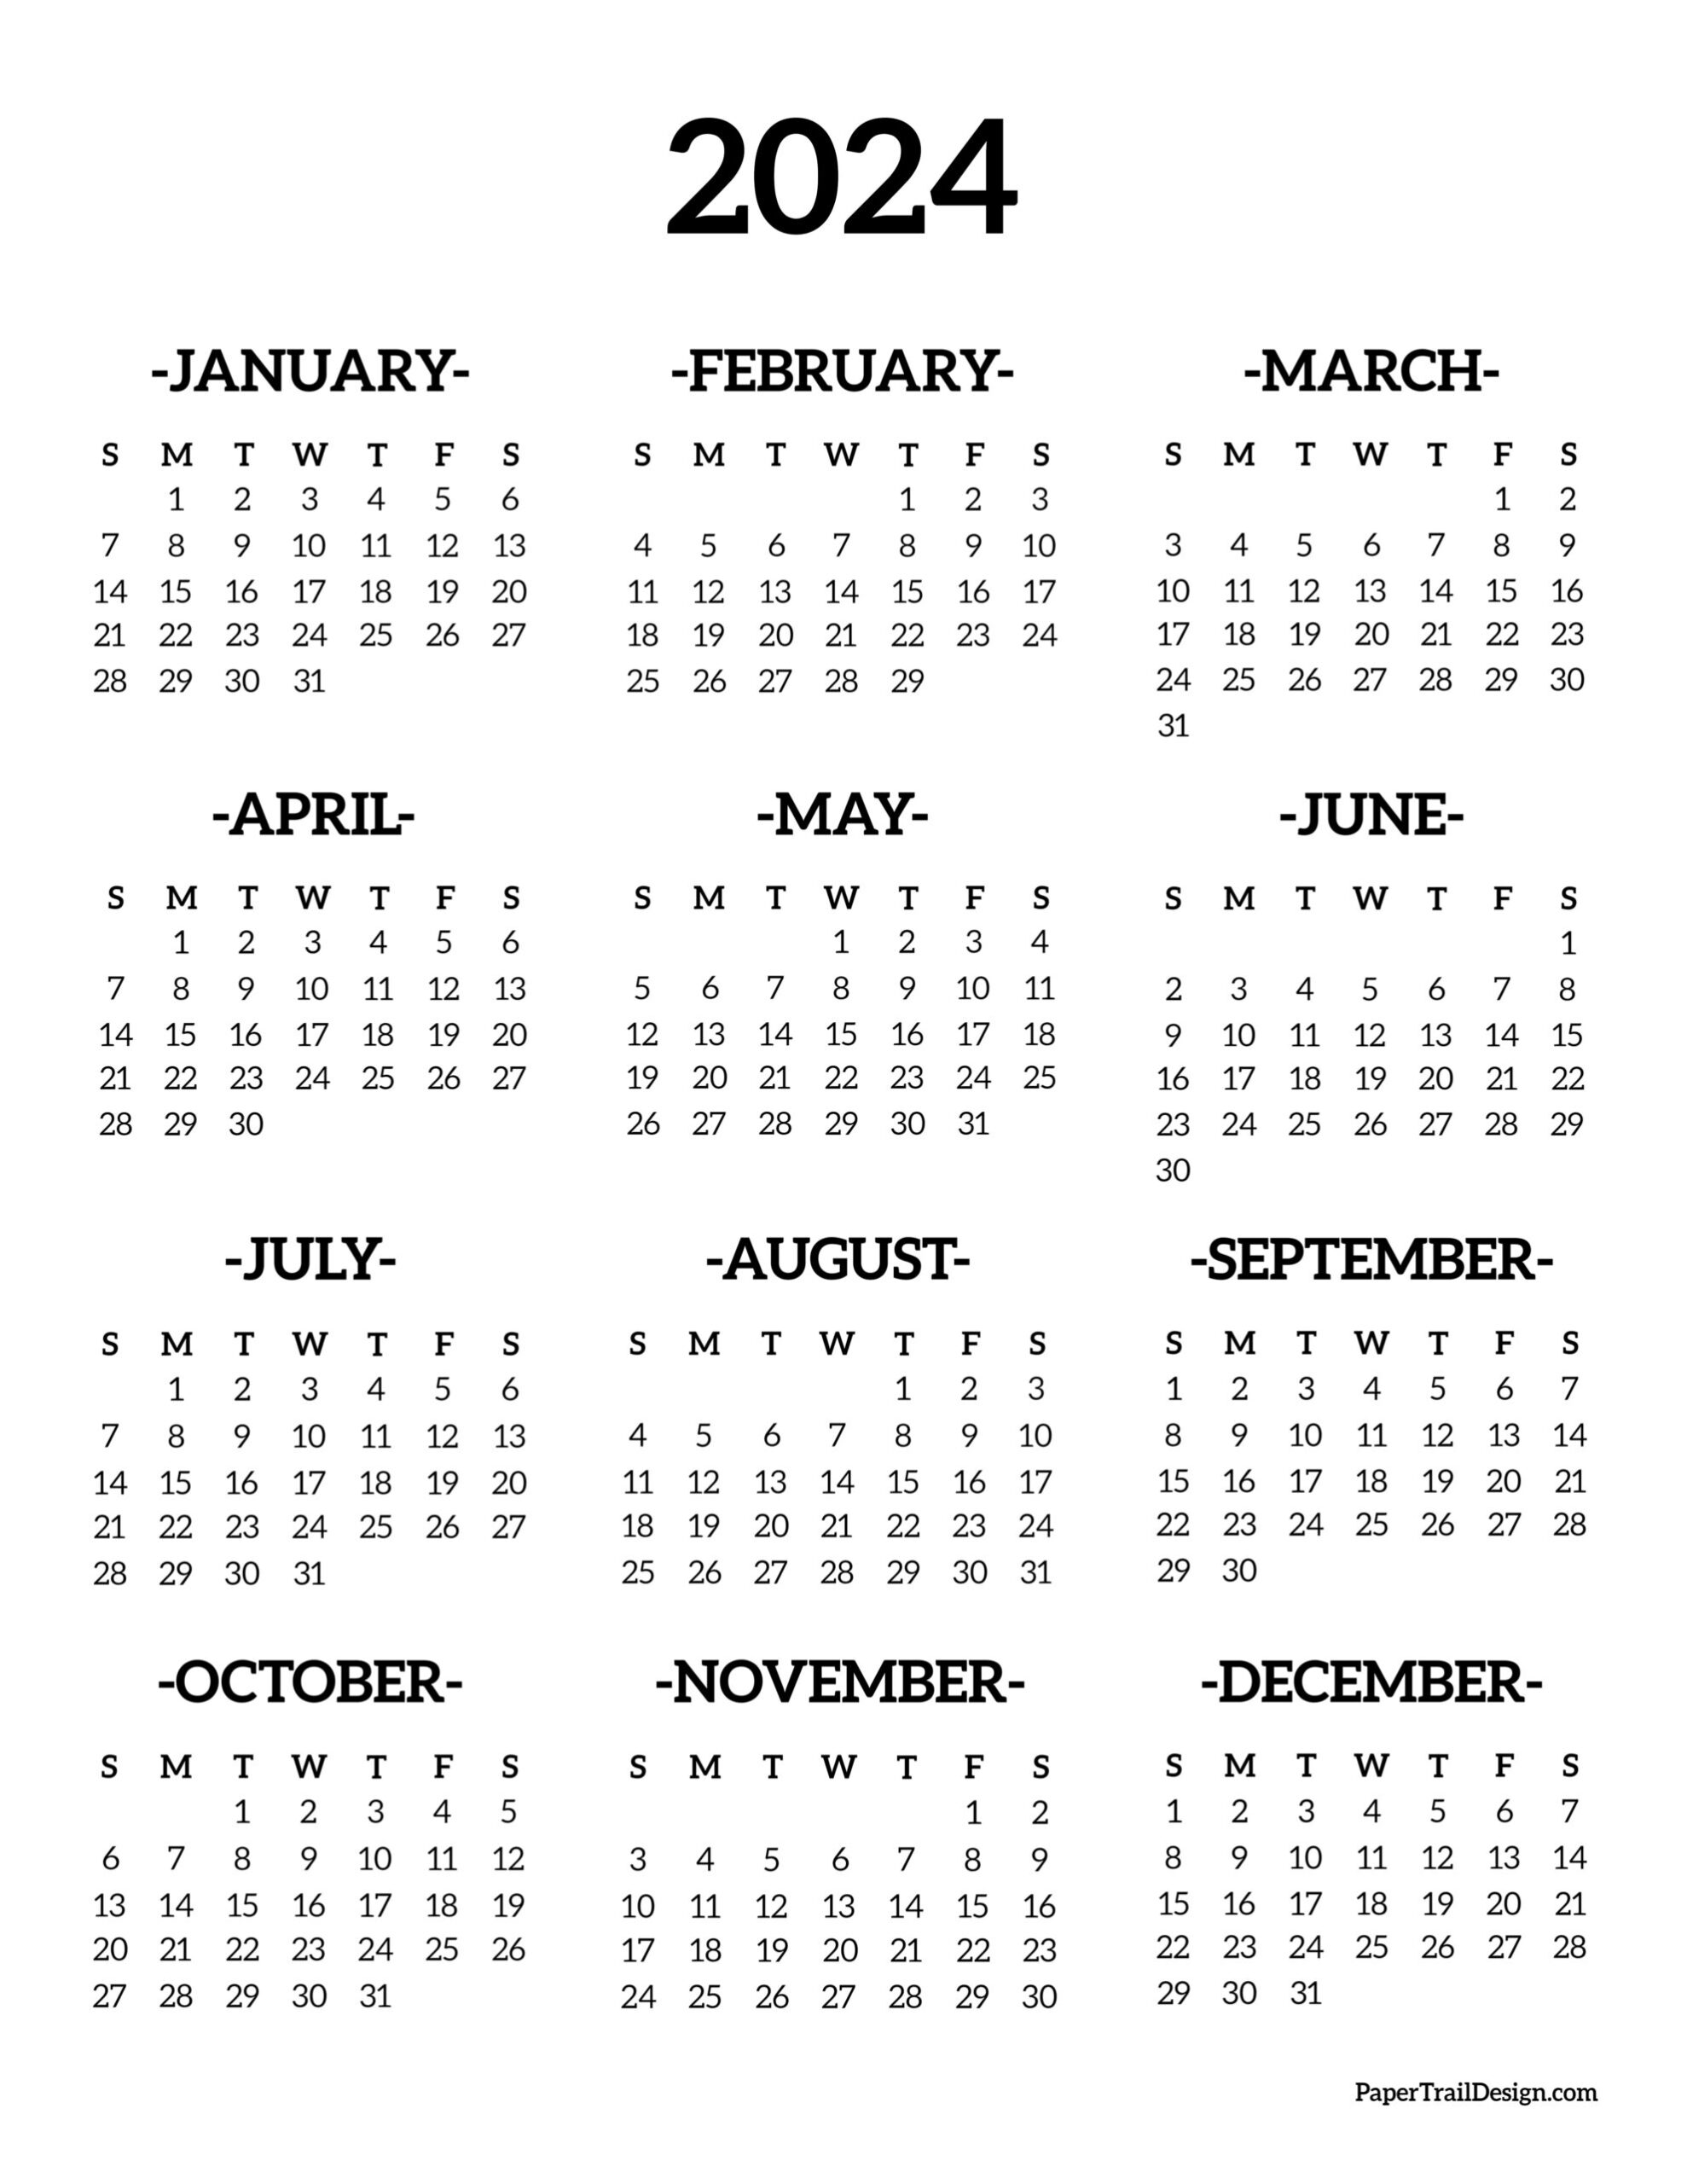 Calendar 2024 Printable One Page - Paper Trail Design for Free Printable 2024 One Page Calendar